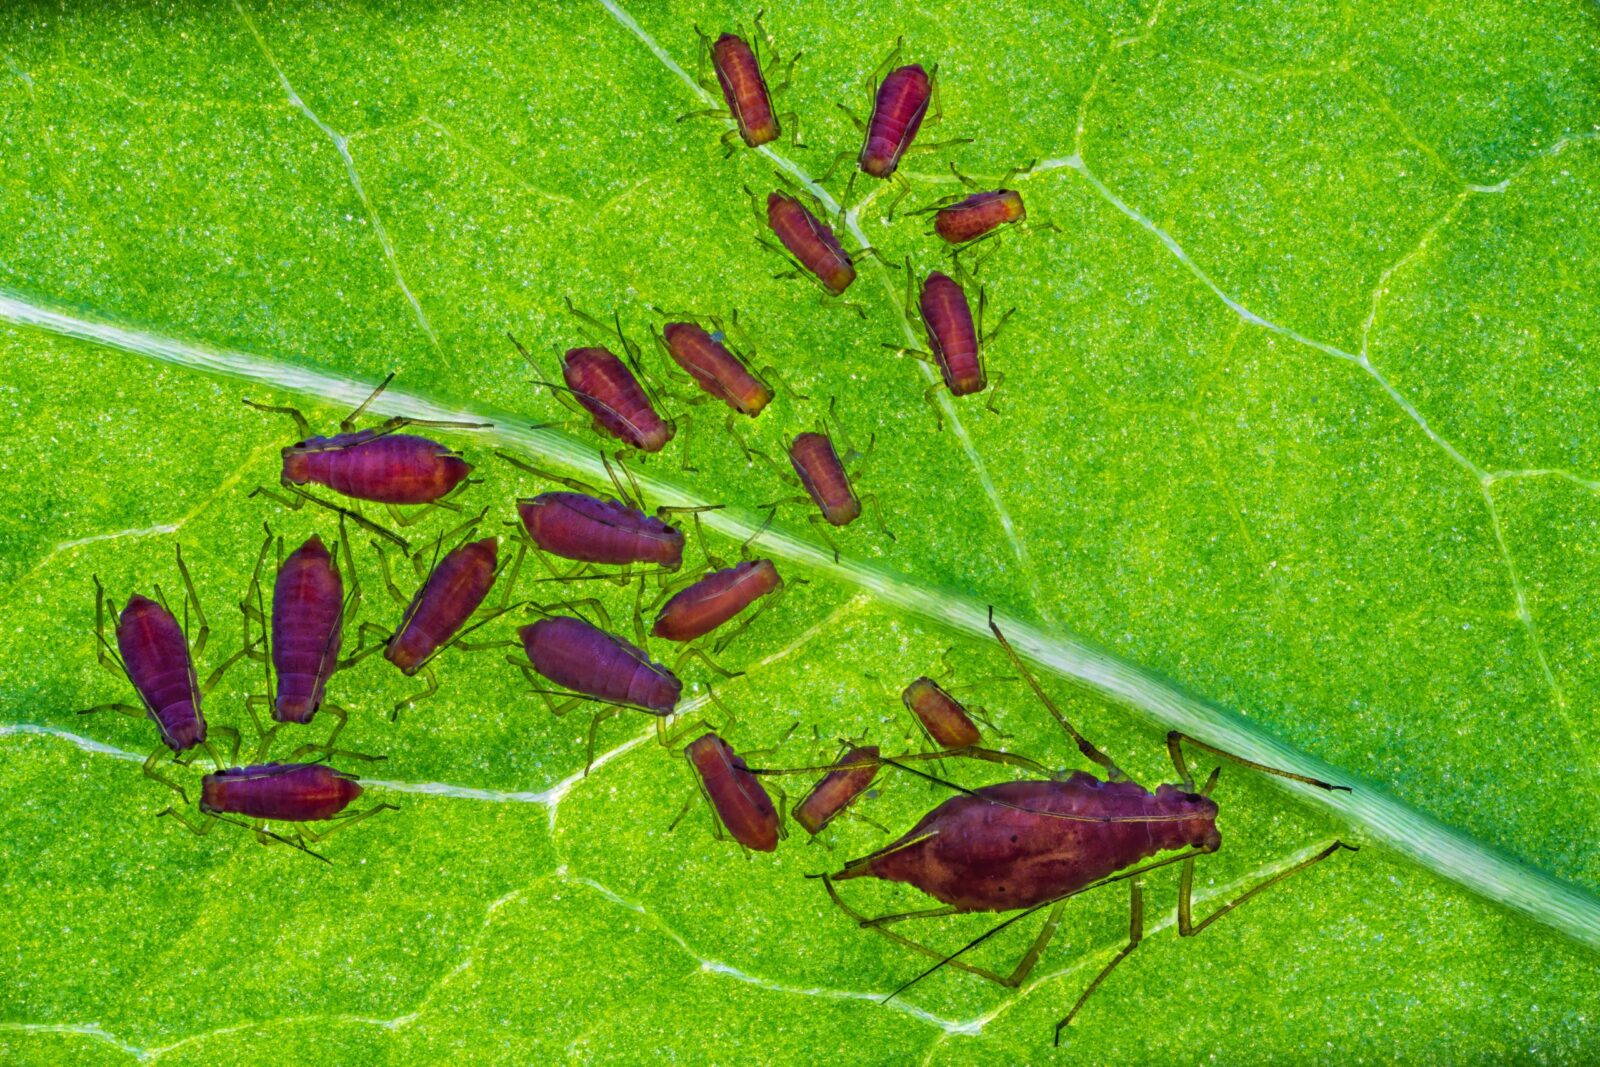 Rose aphids on a green leaf